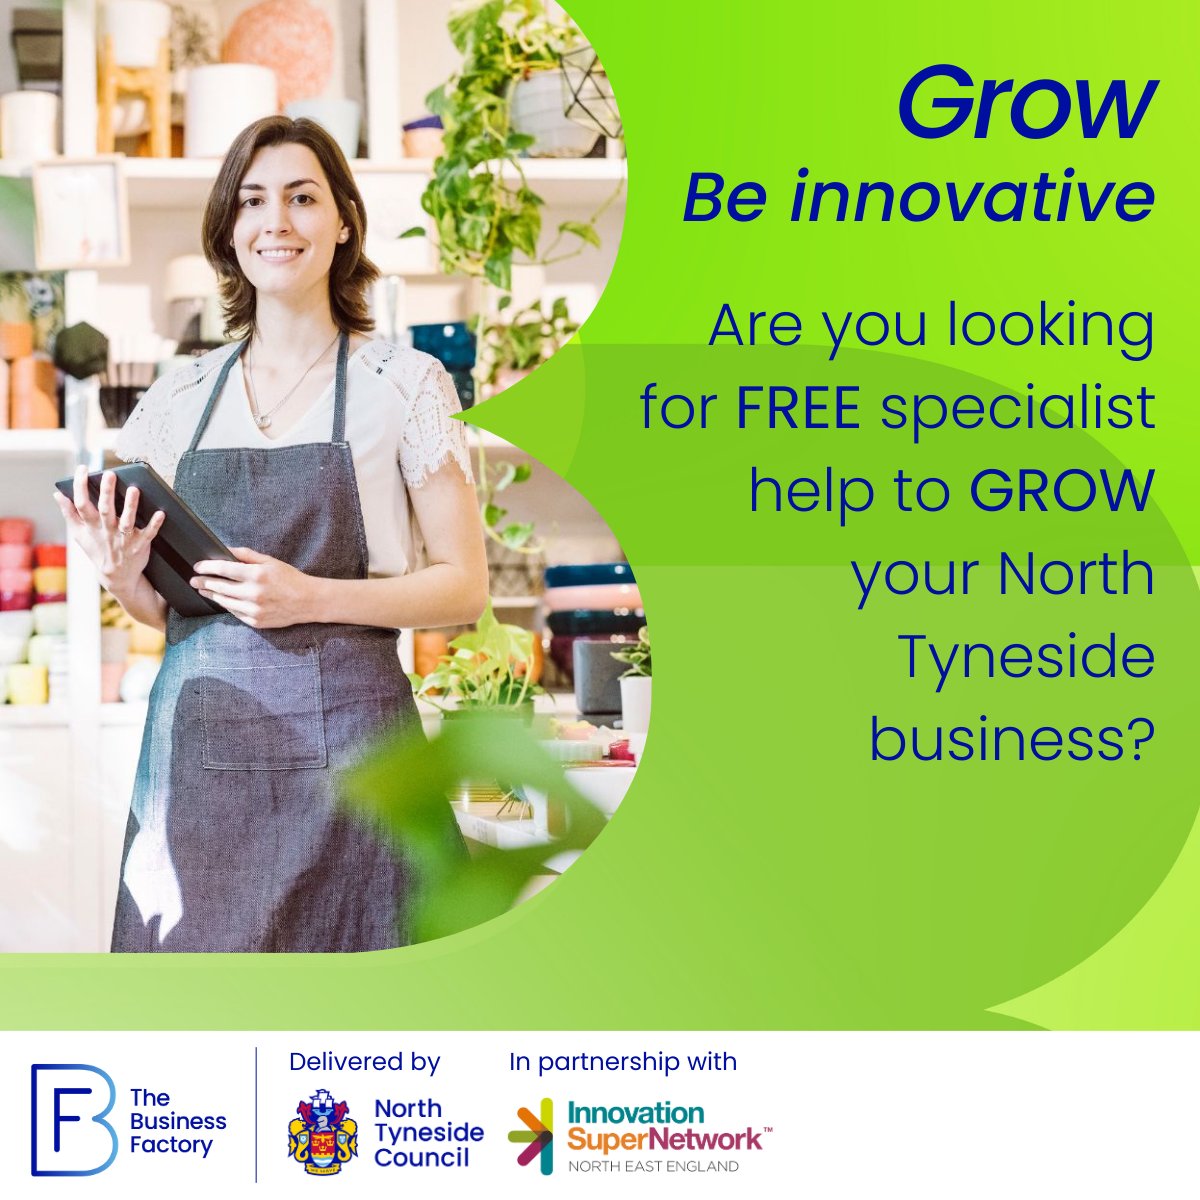 Free business support available in North Tyneside now including: 📈 business strategy 💵 access to finance 💡IP, productivity and innovation 🌎 sustainability and net-zero aims 🧑 recruitment 🏠 property matters Get in touch to find out more 👉 supernetwork.org.uk/support/grow-n…